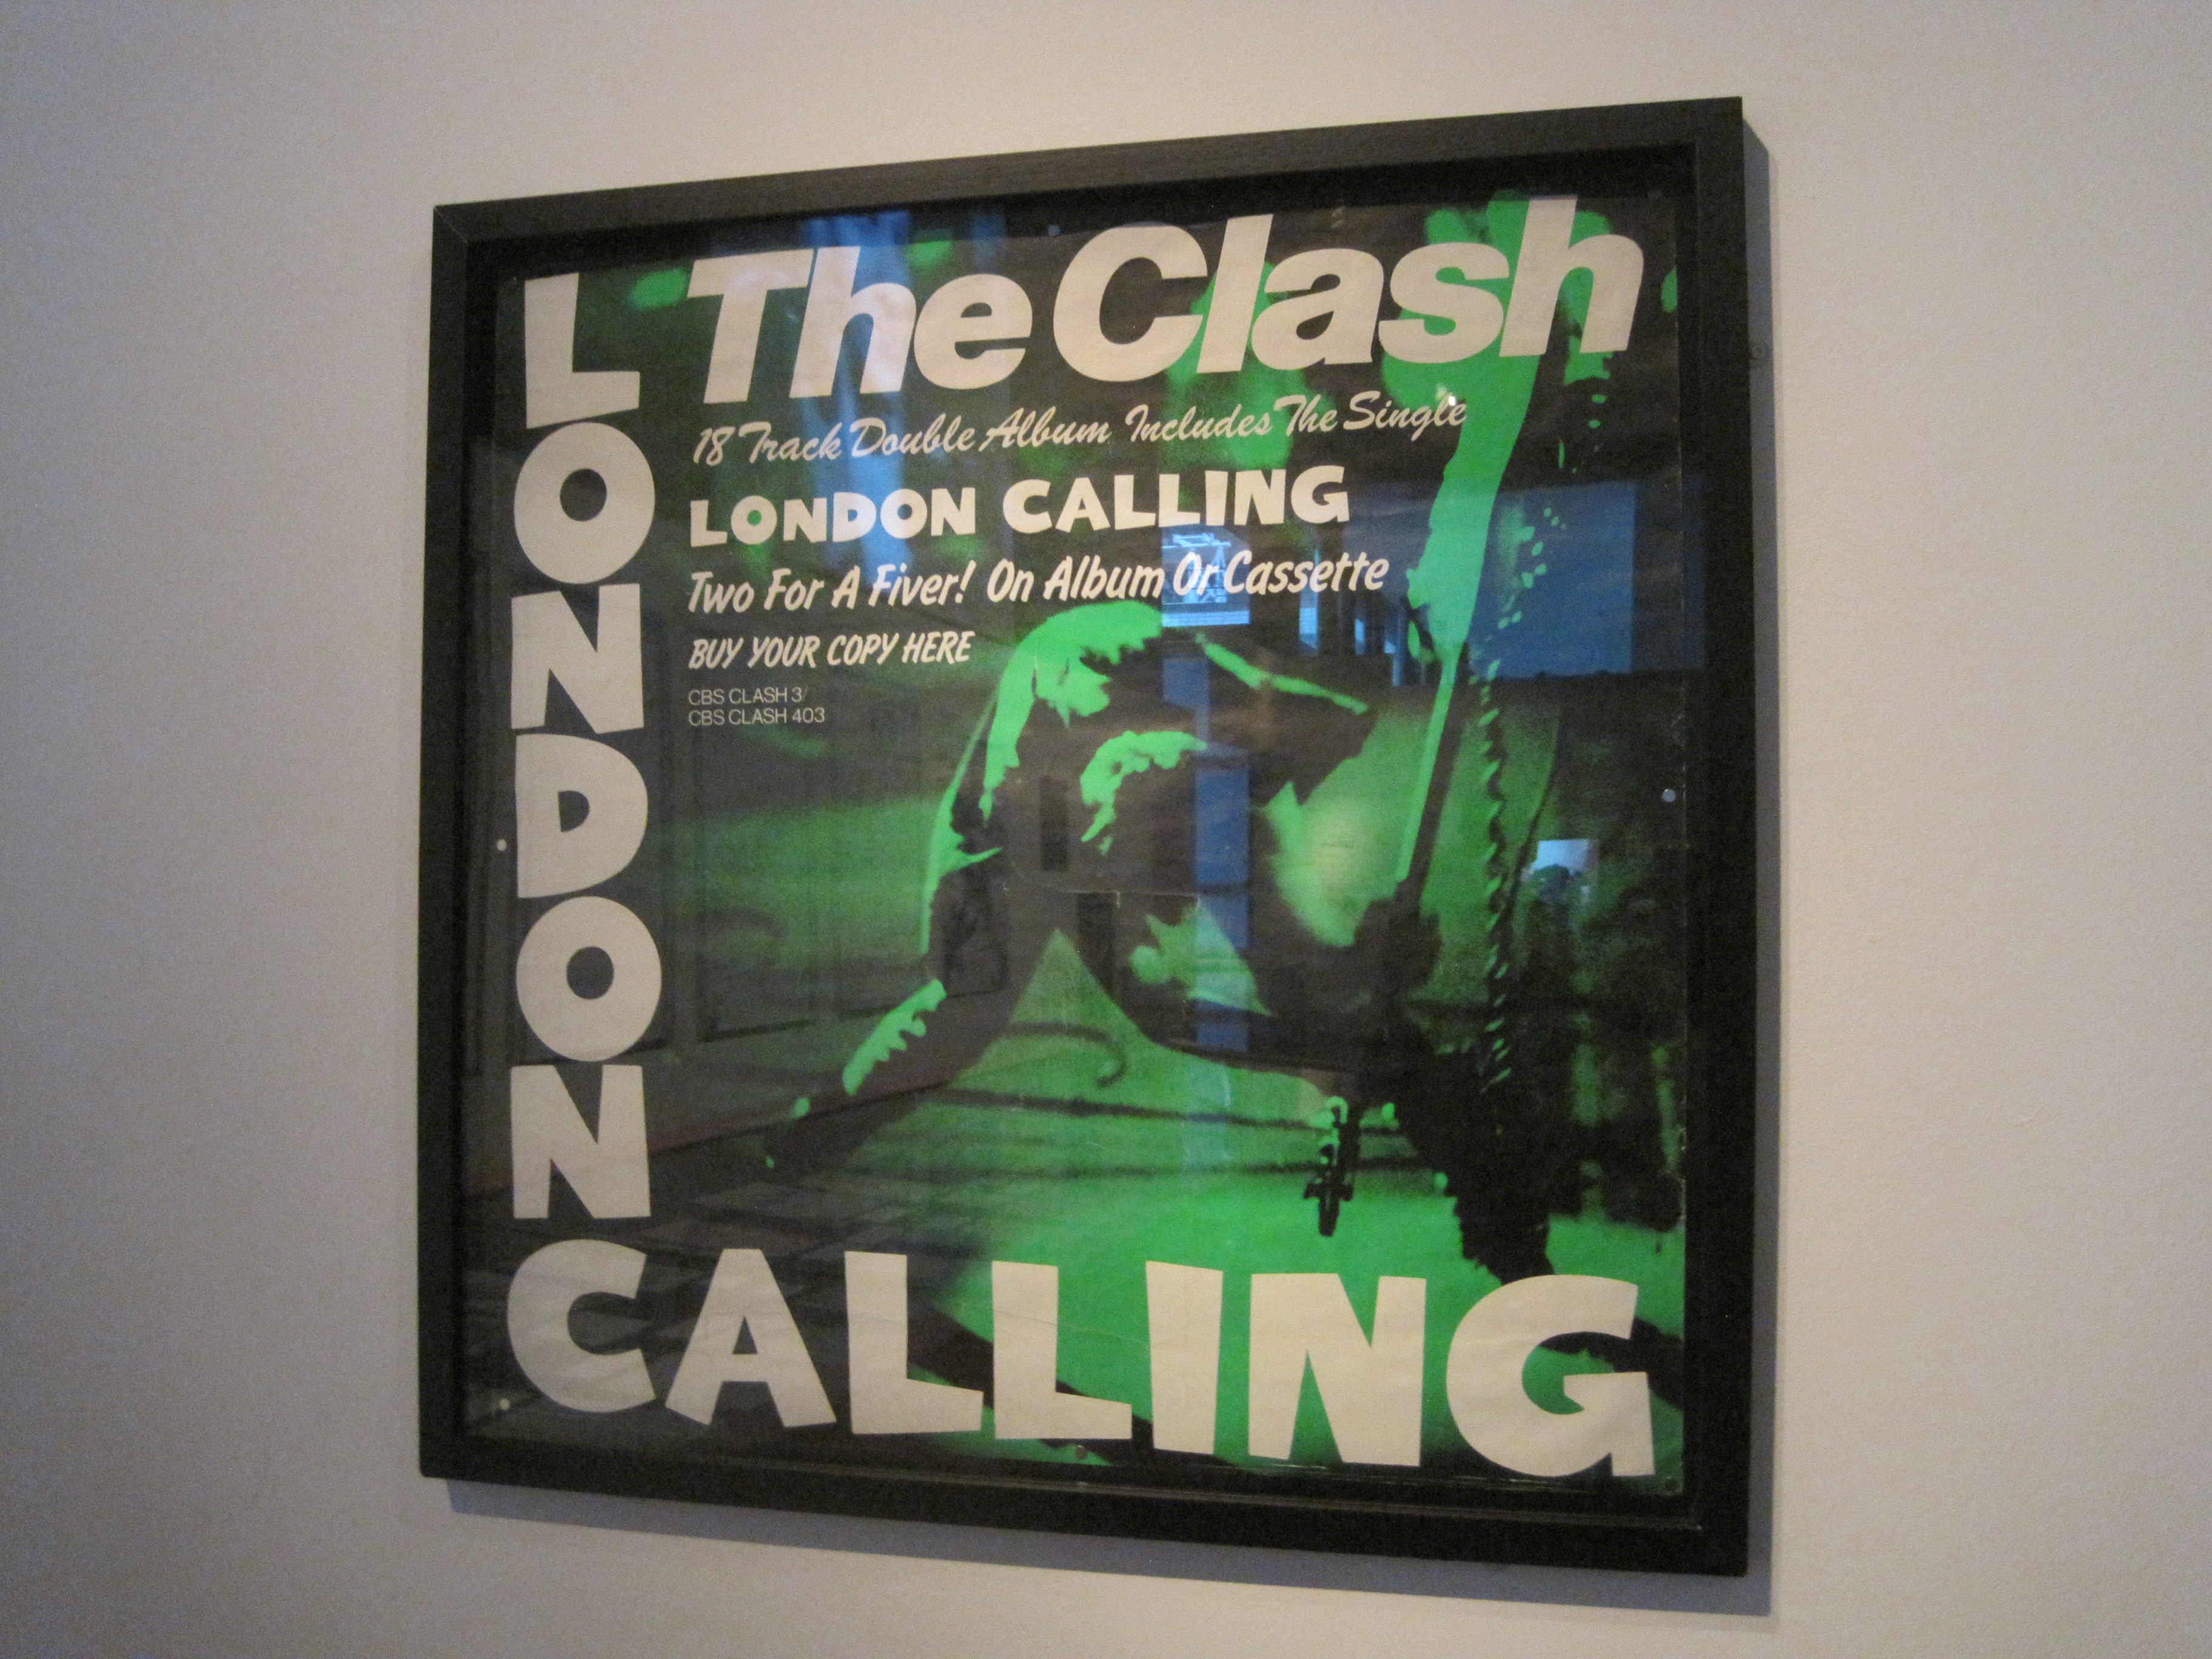 The Clash Exhibition - photo by Juliamaud